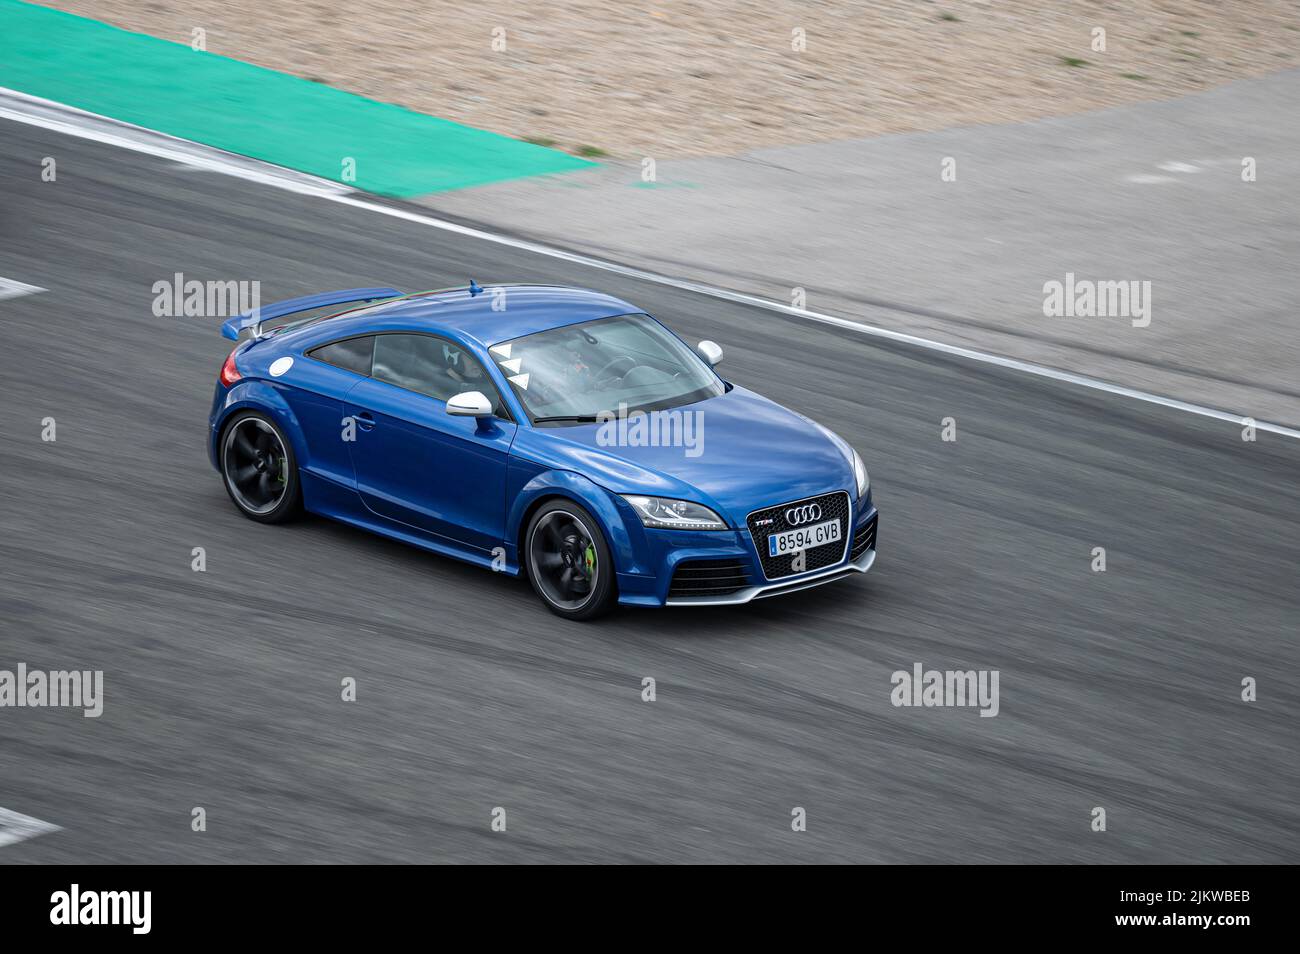 Navarre, Spain; March 7, 2021: Blue second generation Audi TT RS on the race track Stock Photo